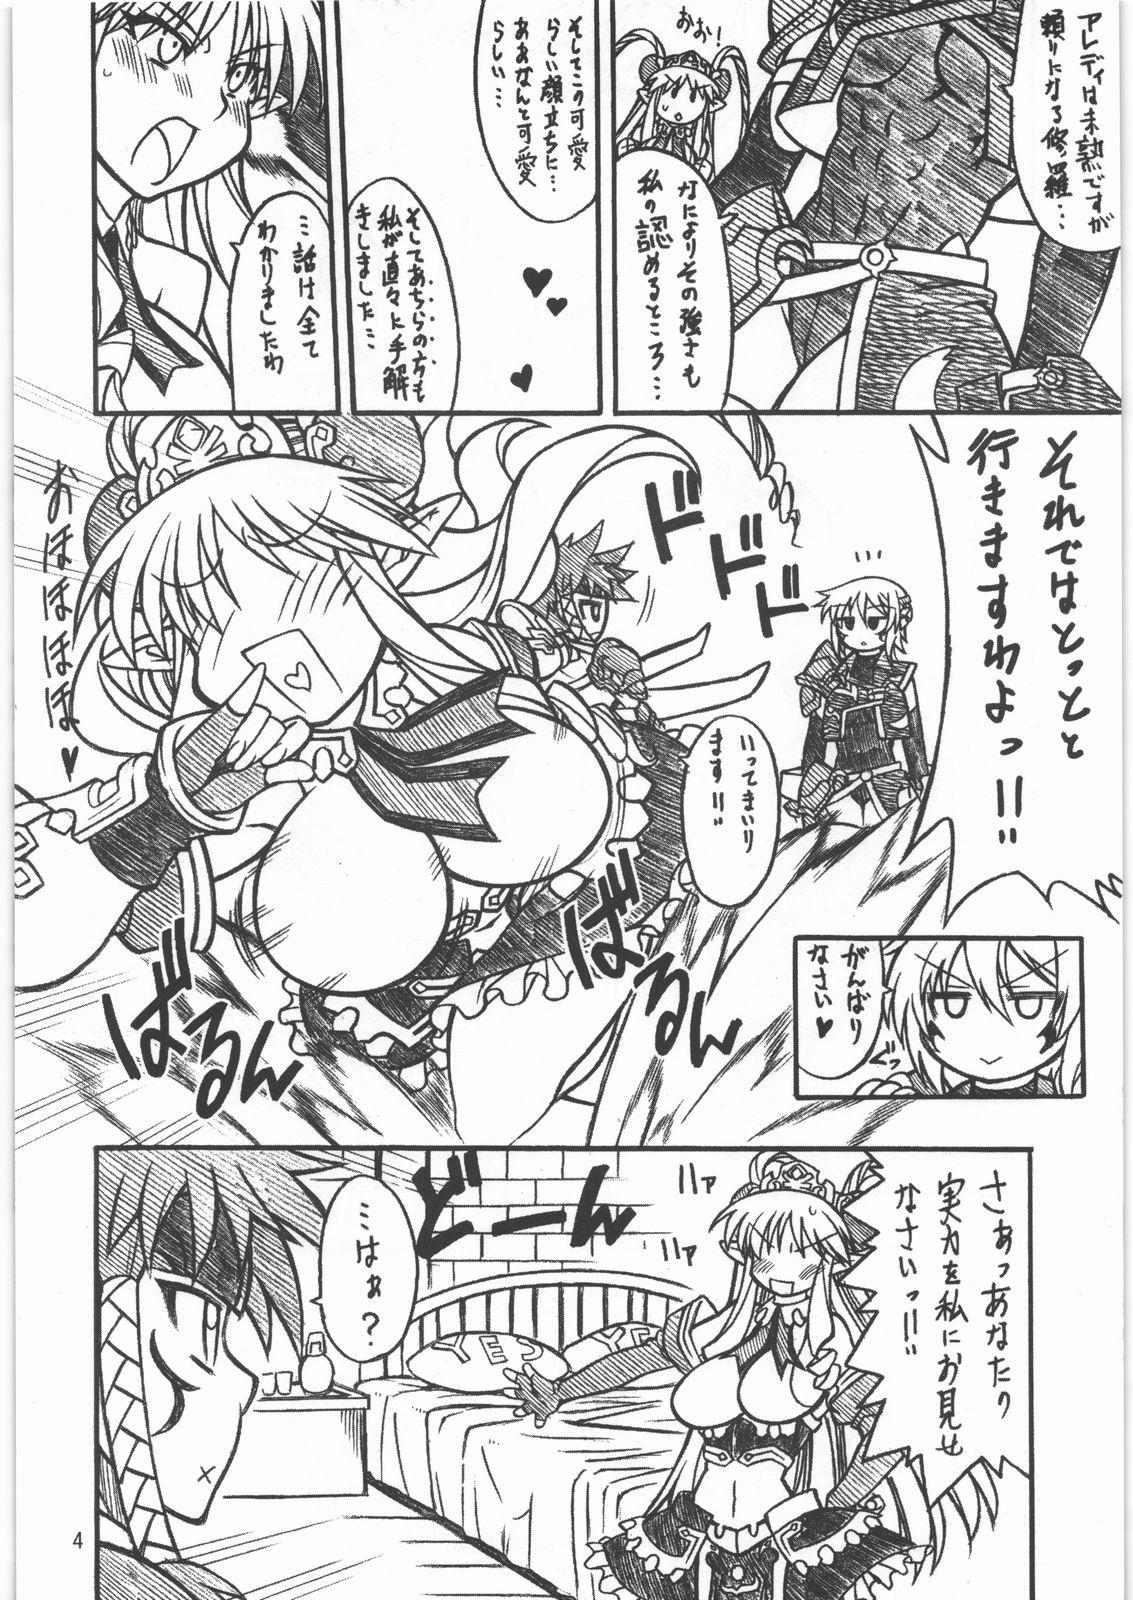 Swallowing Midara Hime EXCEED - Super robot wars Endless frontier Pussyfucking - Page 3